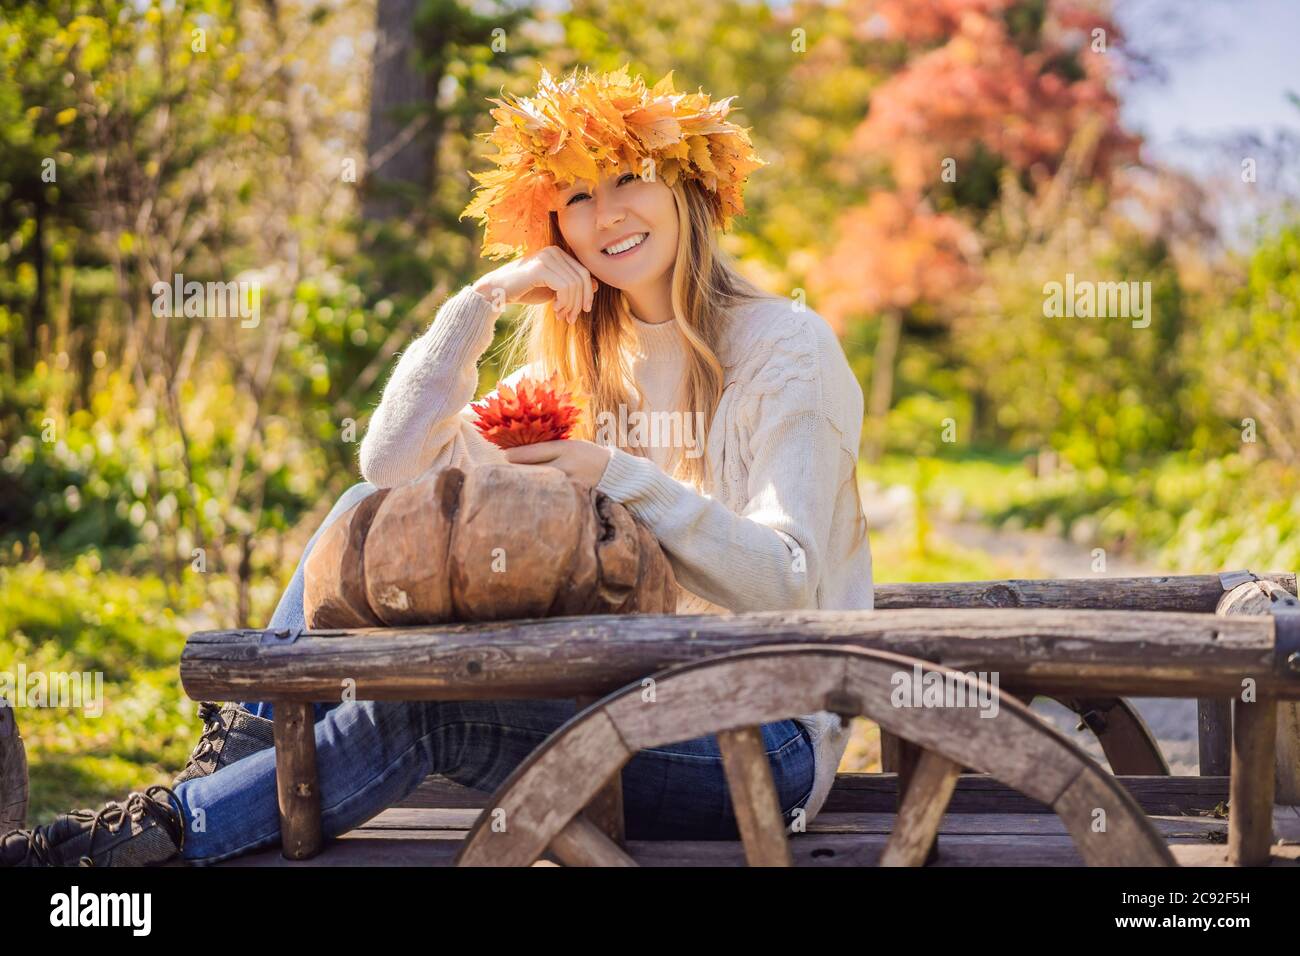 Outdoors lifestyle close up portrait of charming blonde young woman wearing a wreath of autumn leaves. Wearing stylish knitted pullover. Wreath of Stock Photo